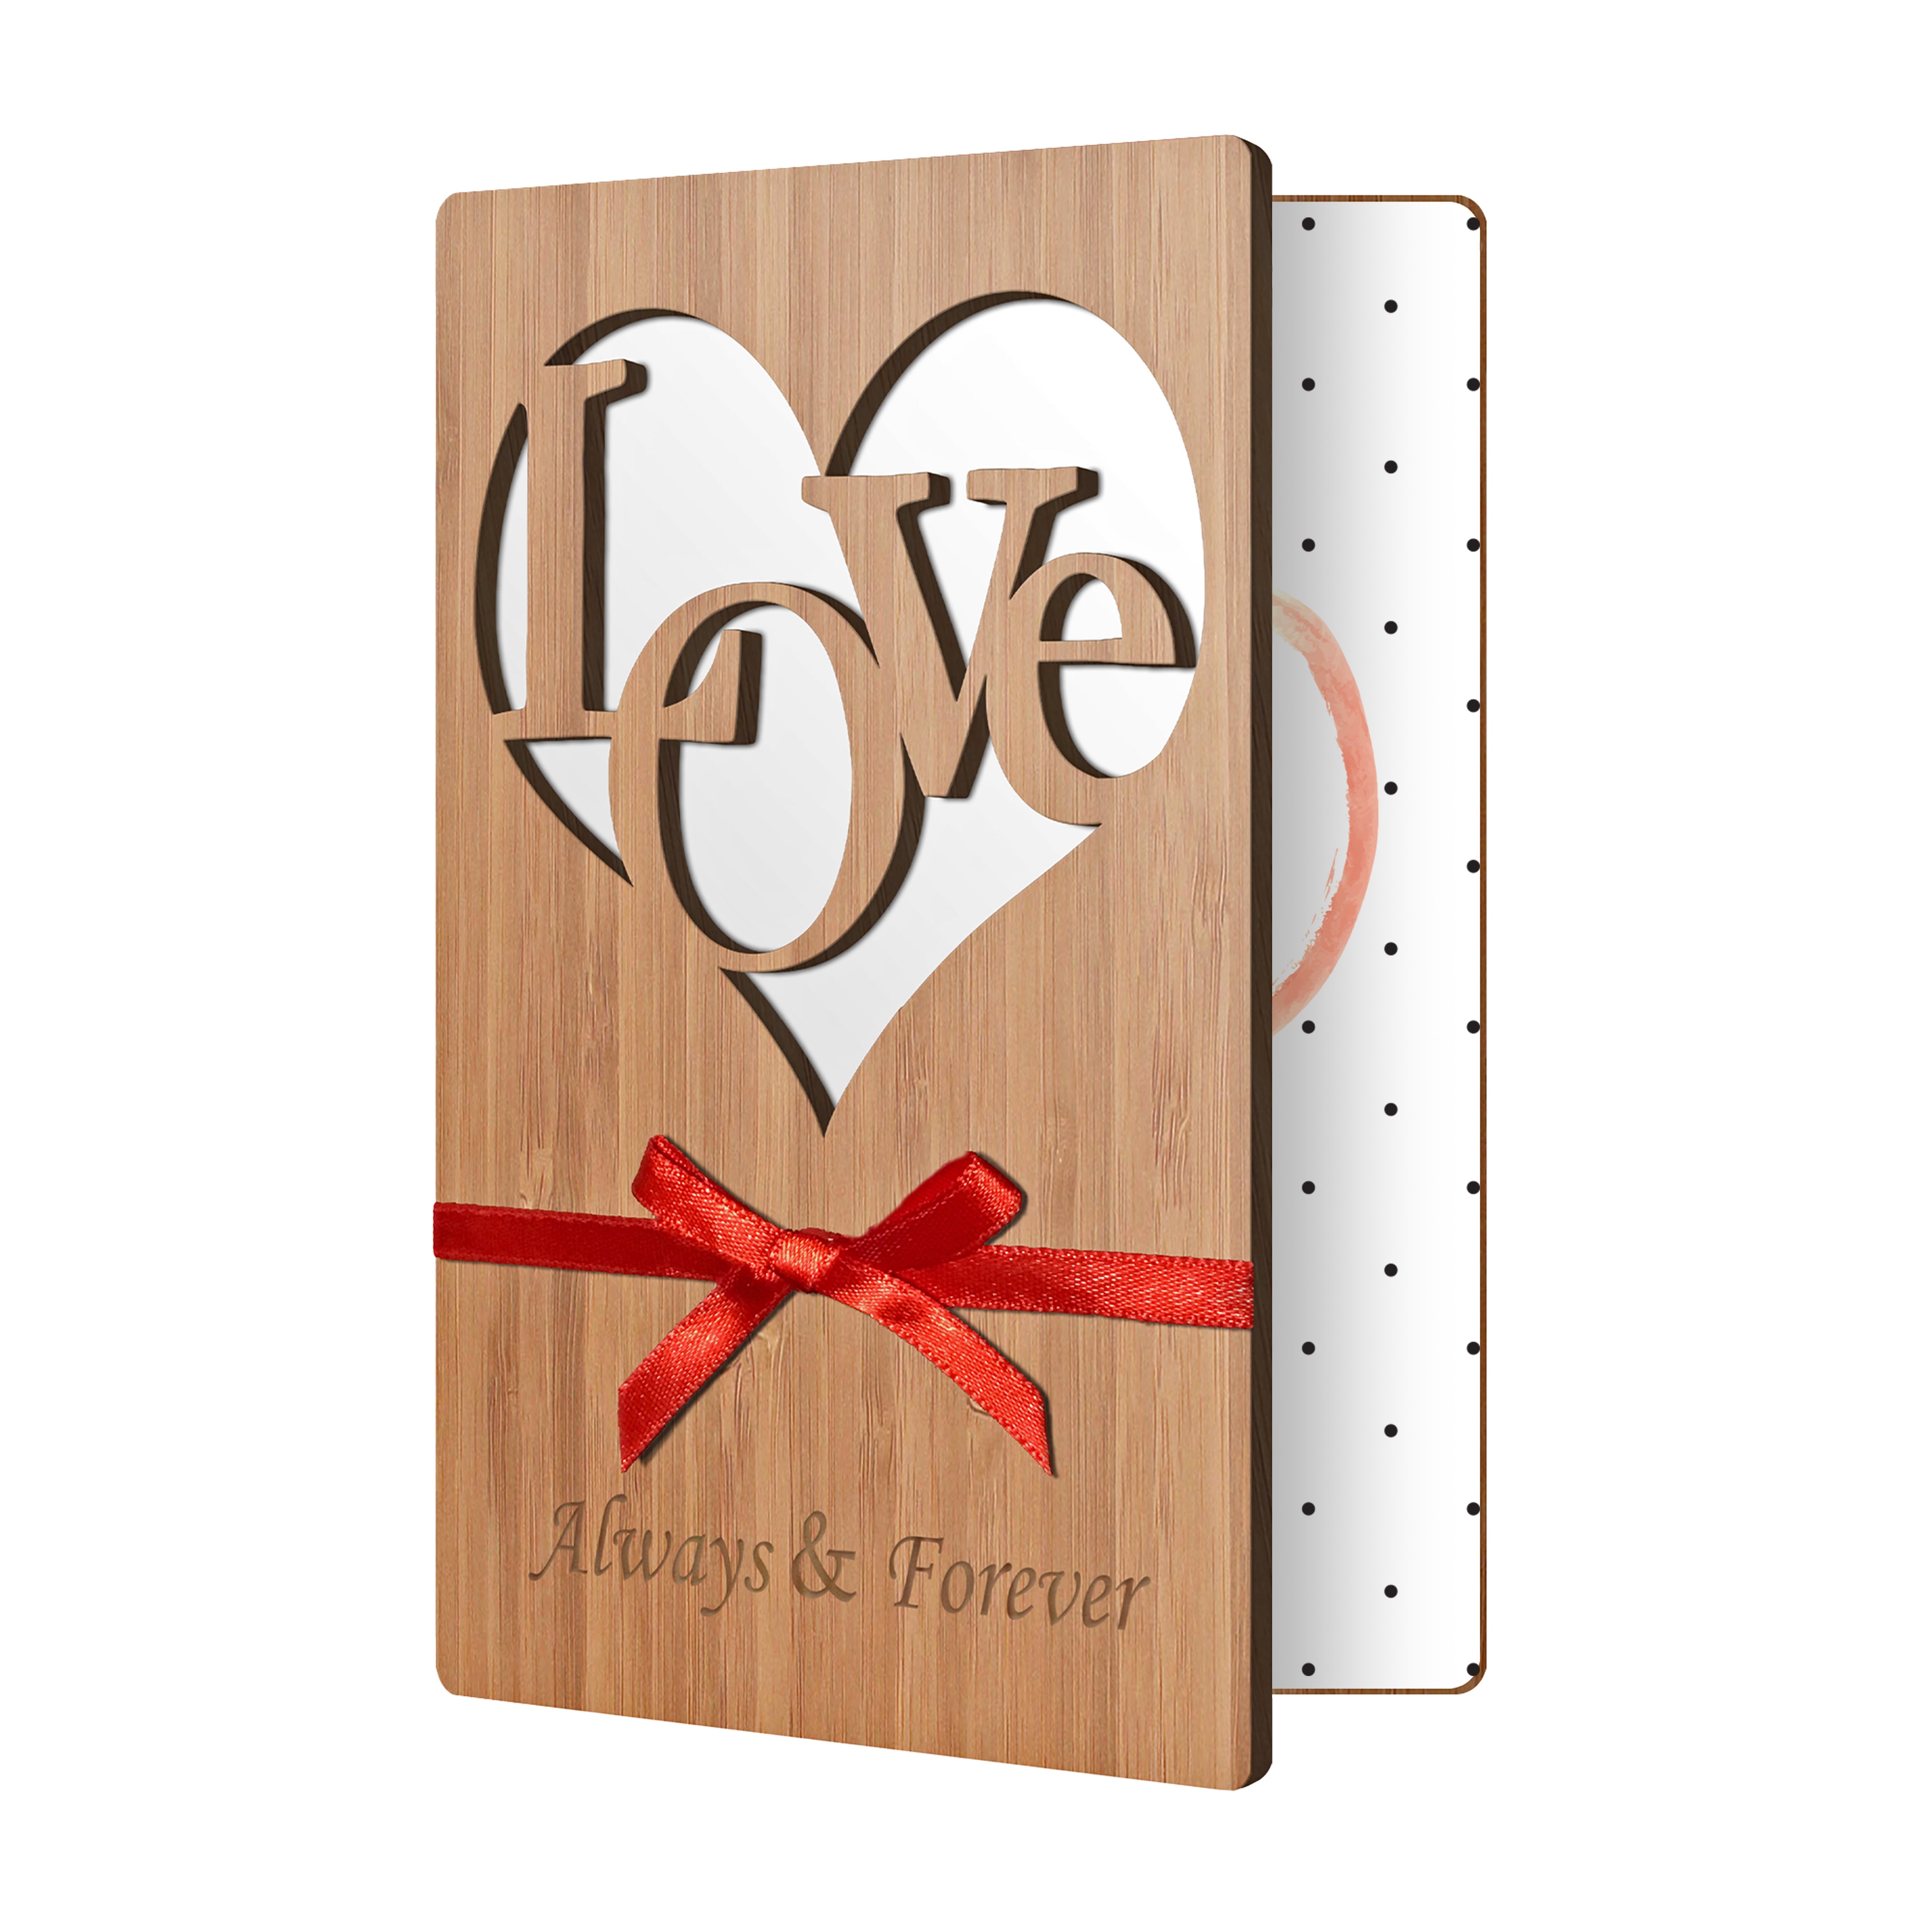 Handcrafted Bamboo Mother's Day Cards - Love in Heart